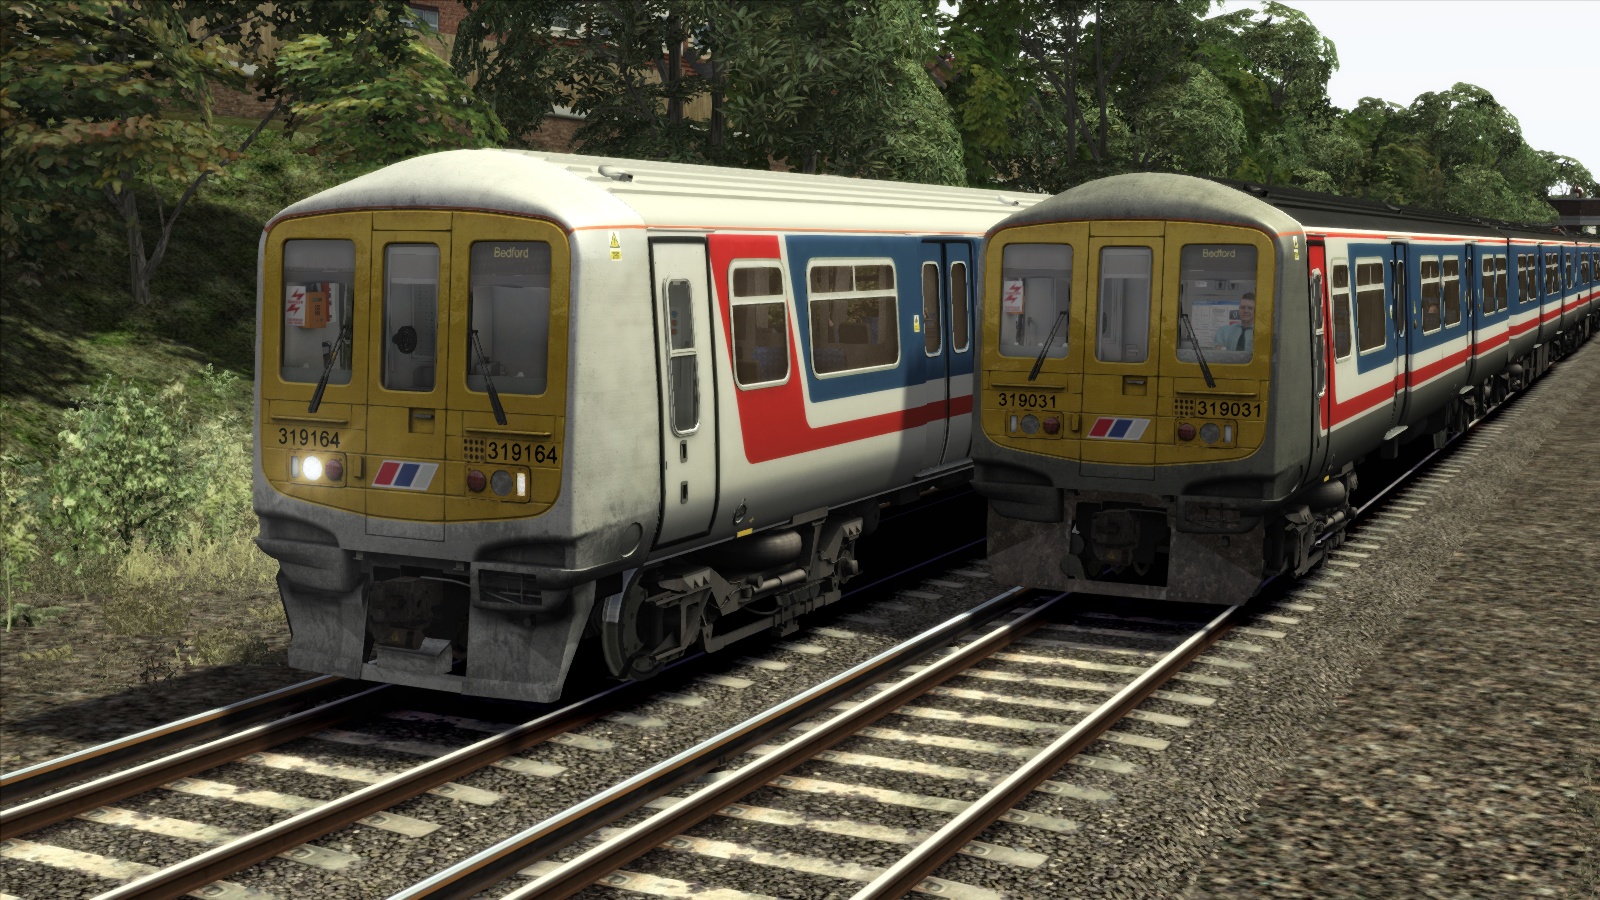 Network South East Class 319 Add-on Livery screenshot